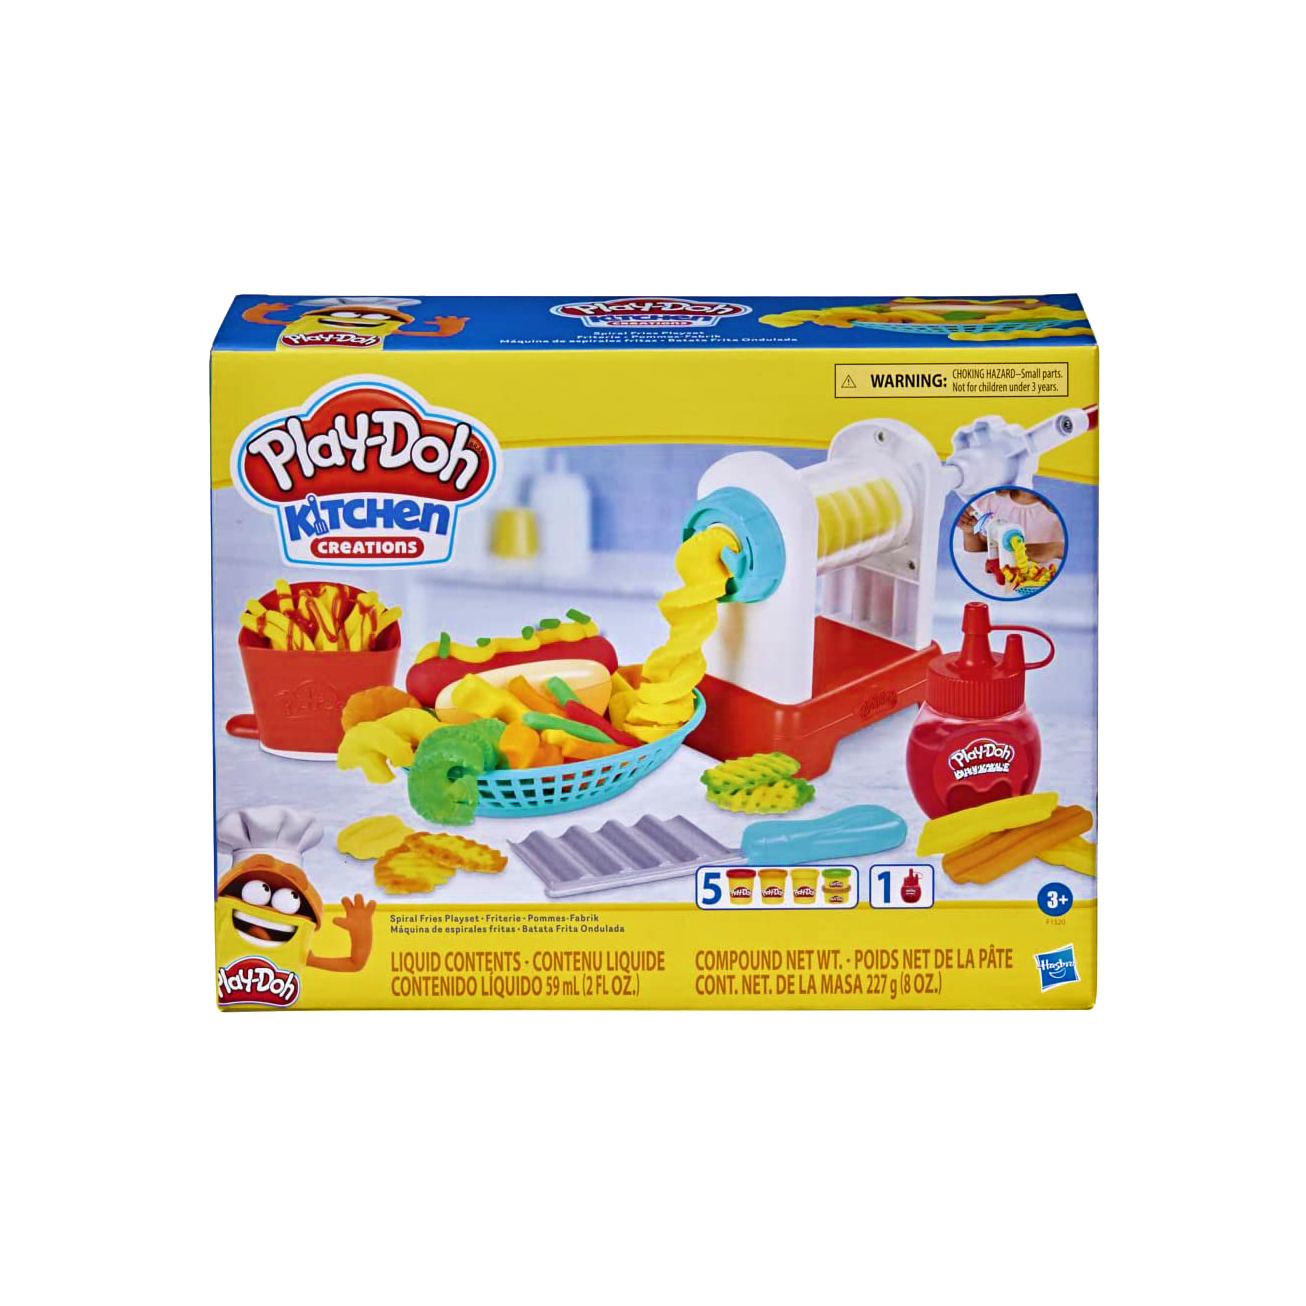 Play-Doh Kitchen Spiral Fries Playset, Ages 3+